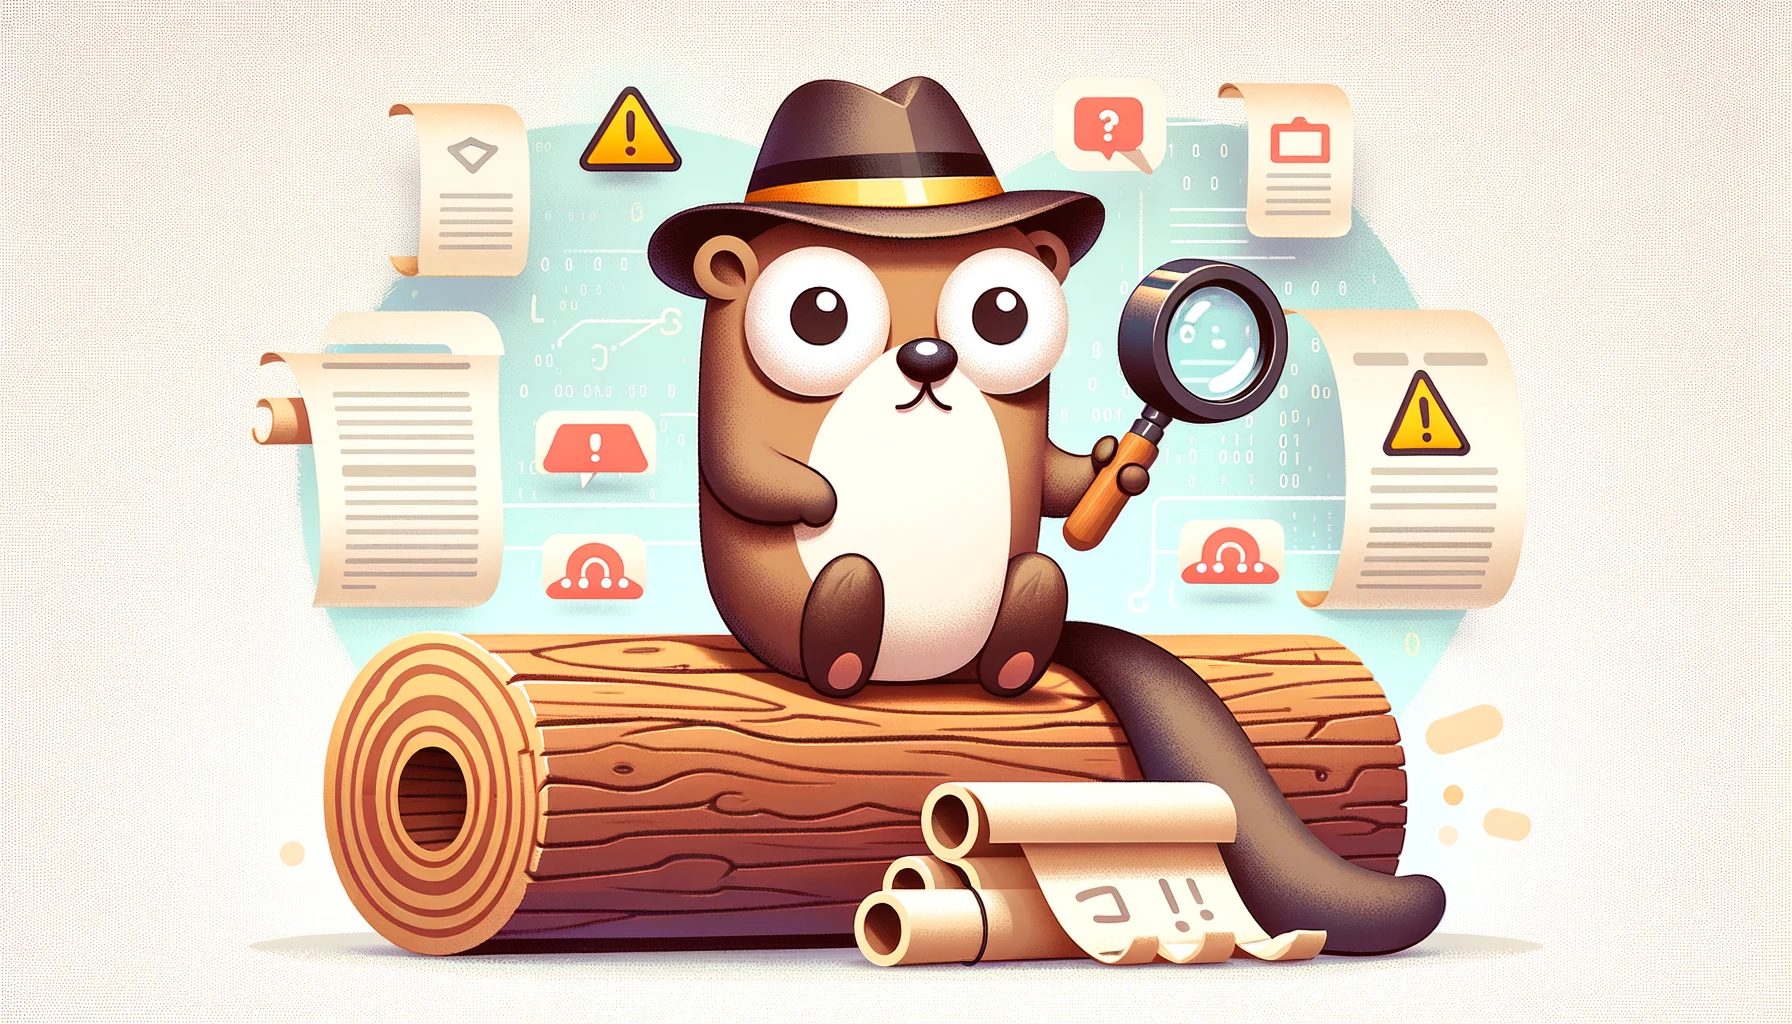 images/secure-and-effective-logging-in-golang--best-practices-and-tools.webp